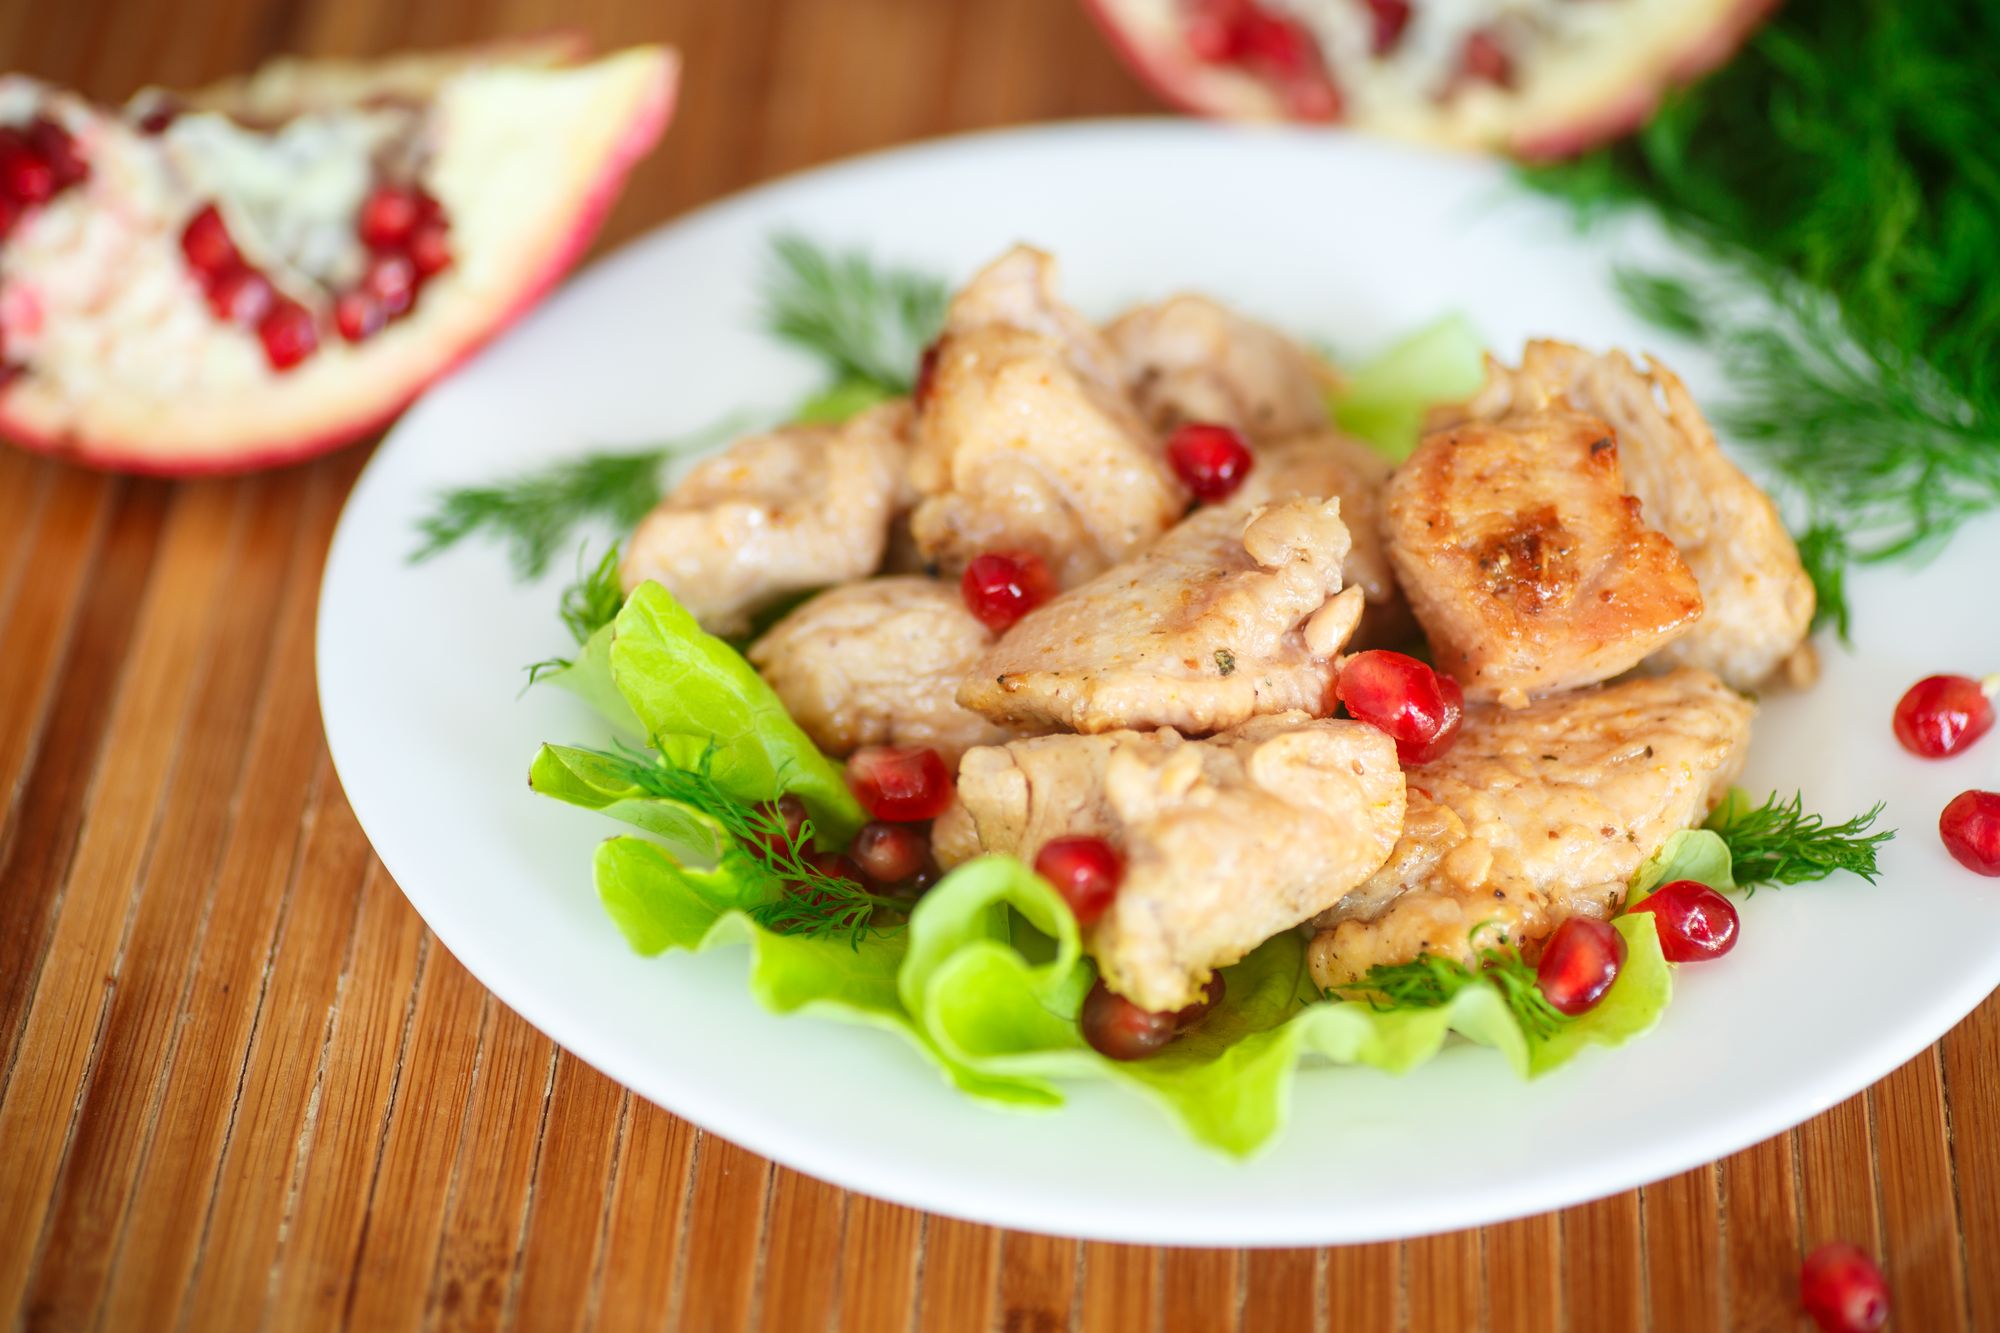 Spiced Chicken and Pomegranate Salad